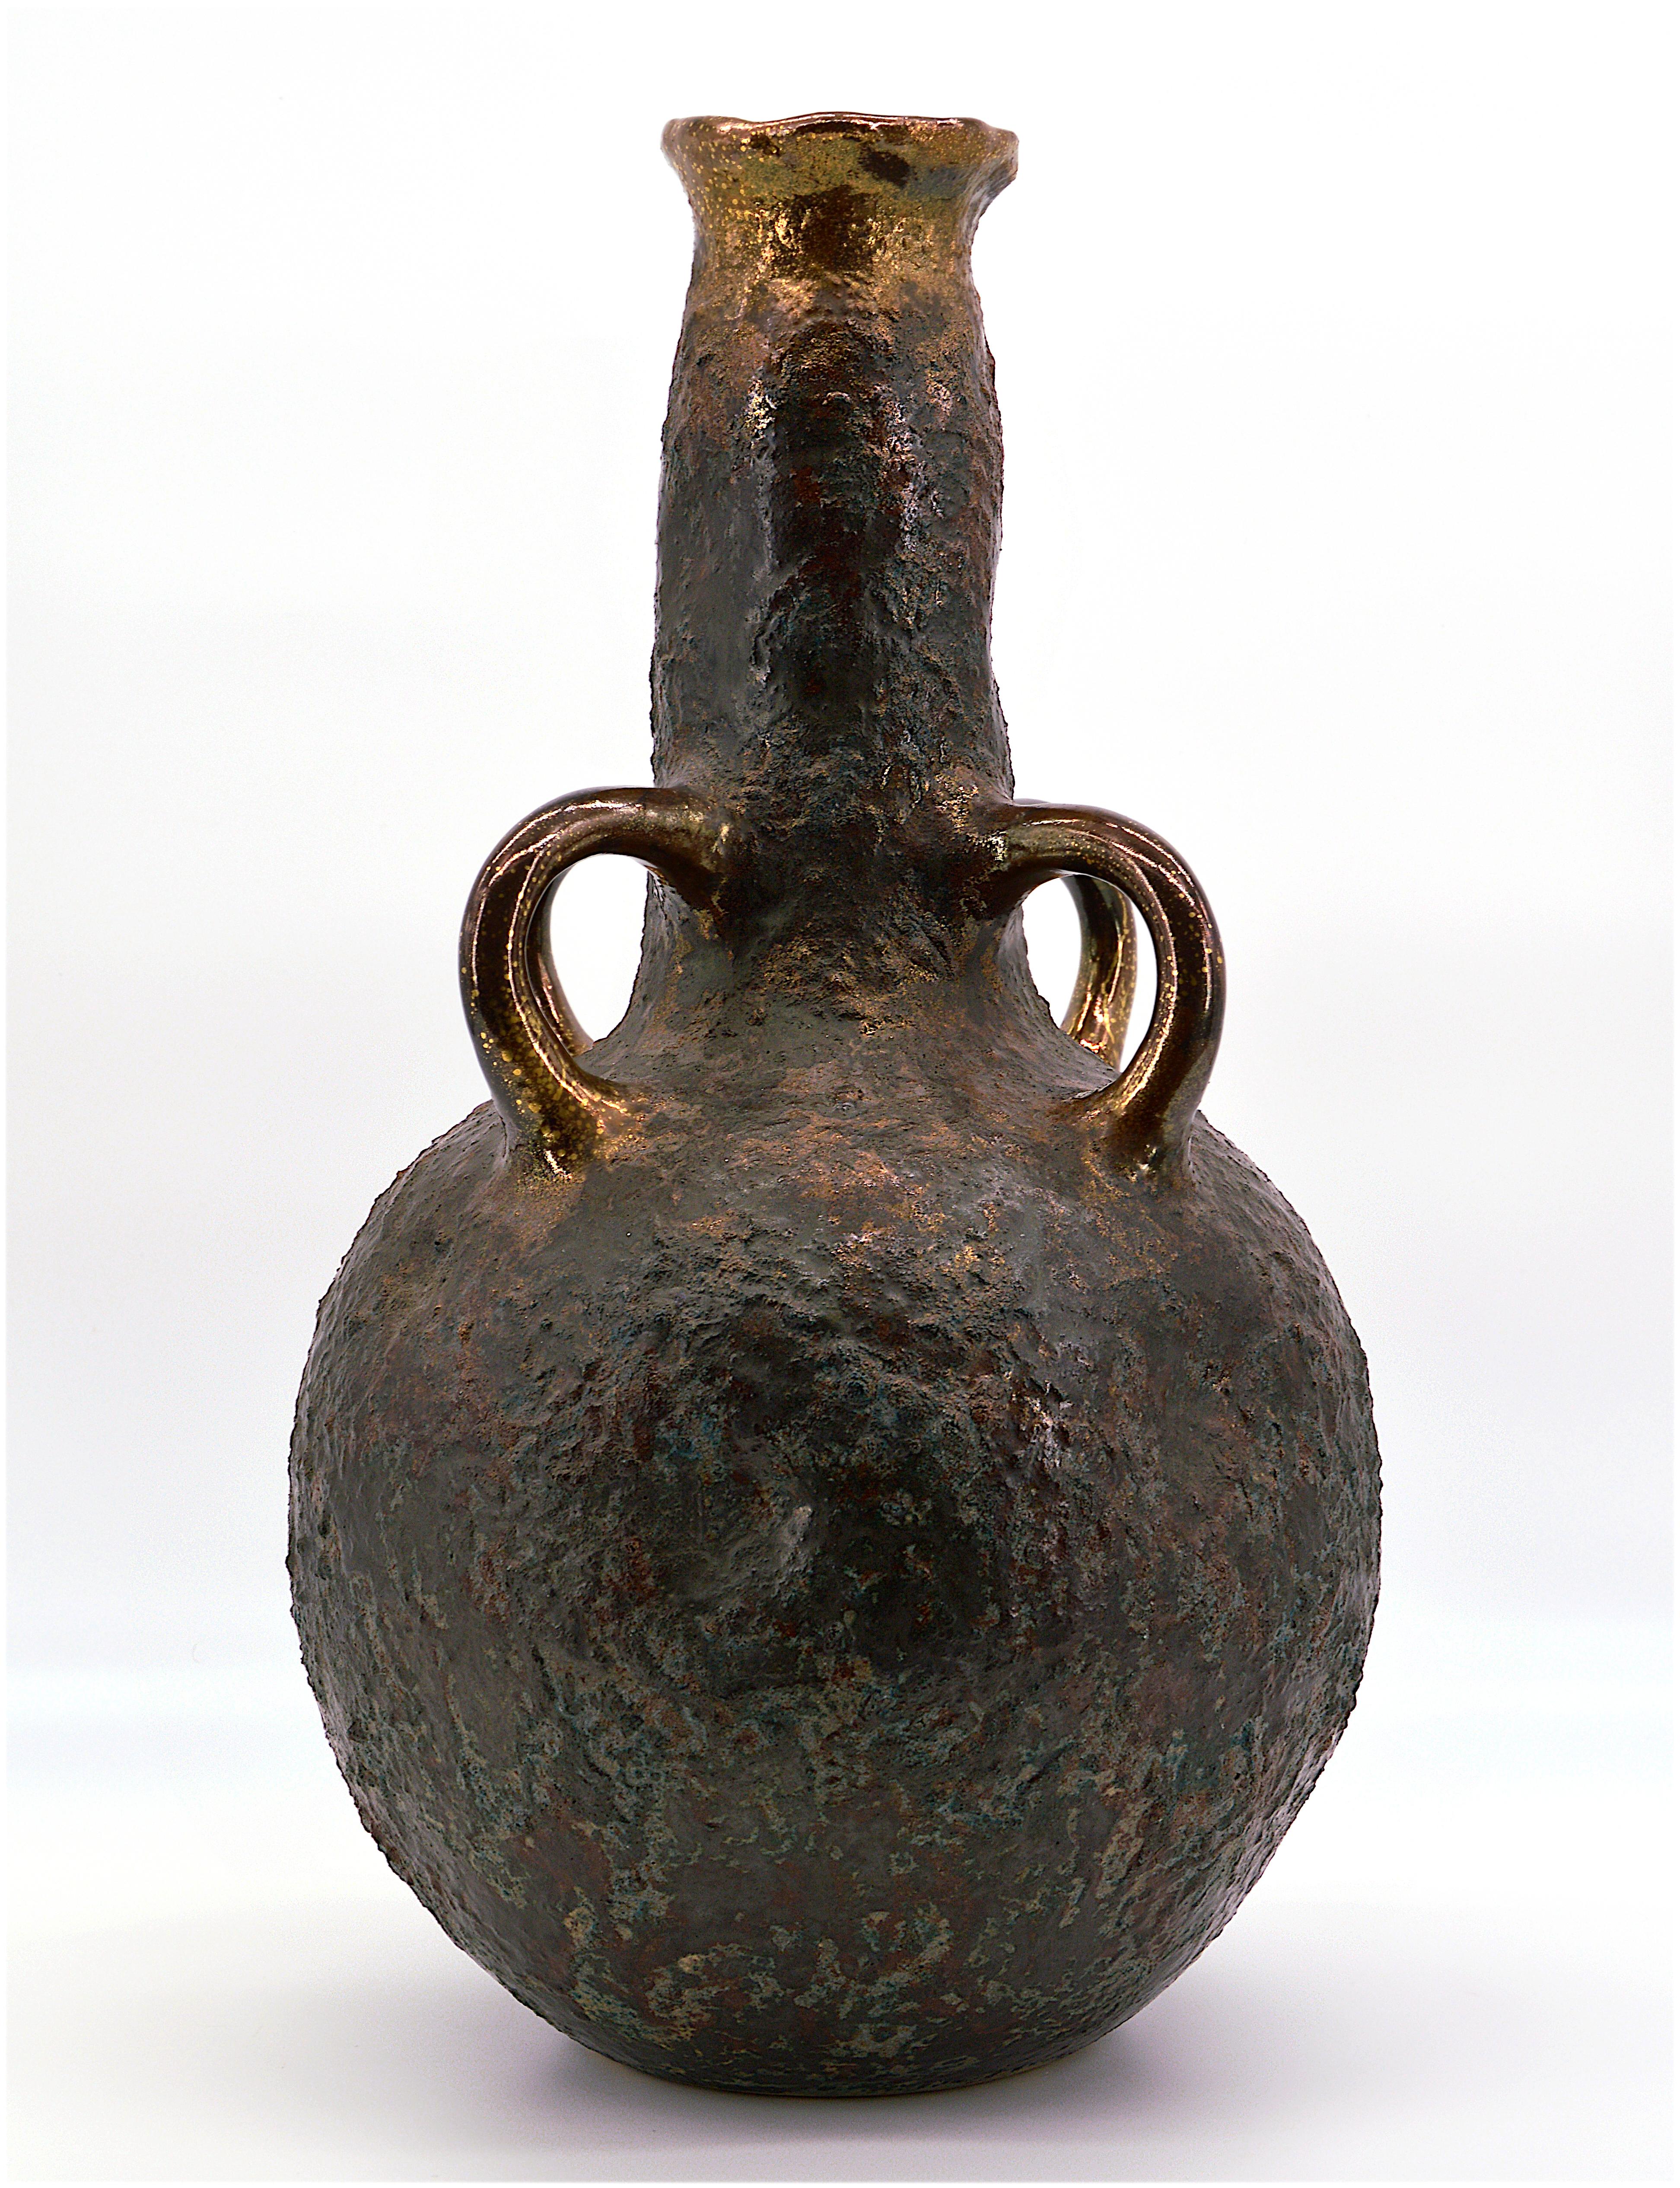 Large and spectacular French stoneware vase, France, 20th century large and spectacular vase with four handles. Thick stoneware with metal oxides. Great effect! Measures: Height 49 cm, 19.3 in., diameter 27 cm, 10.6 in.